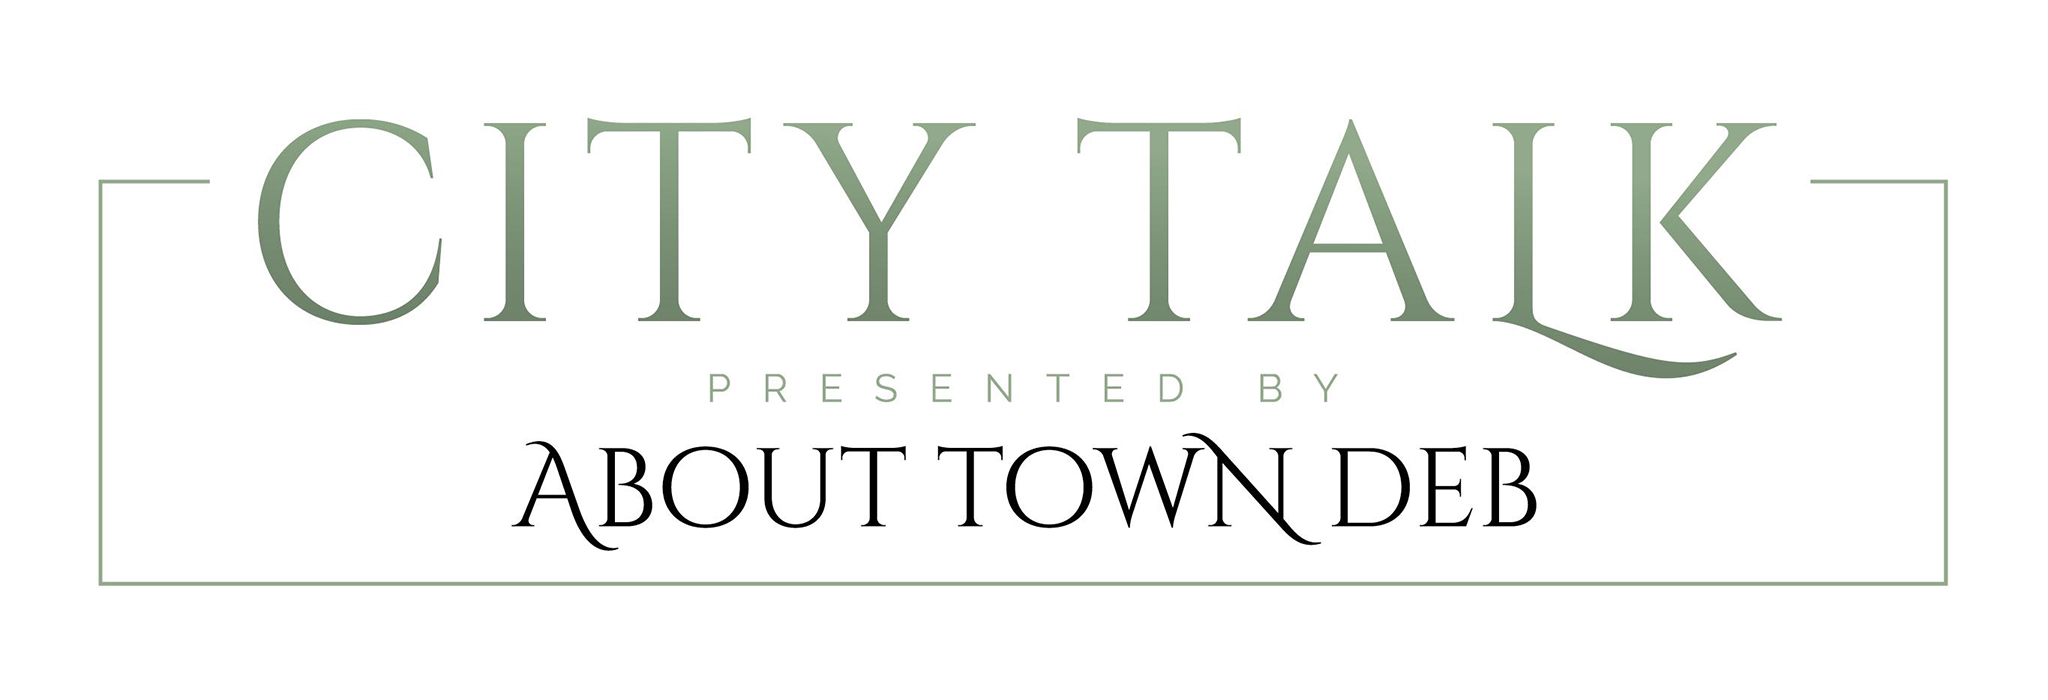 About Town Deb Presents City Talk